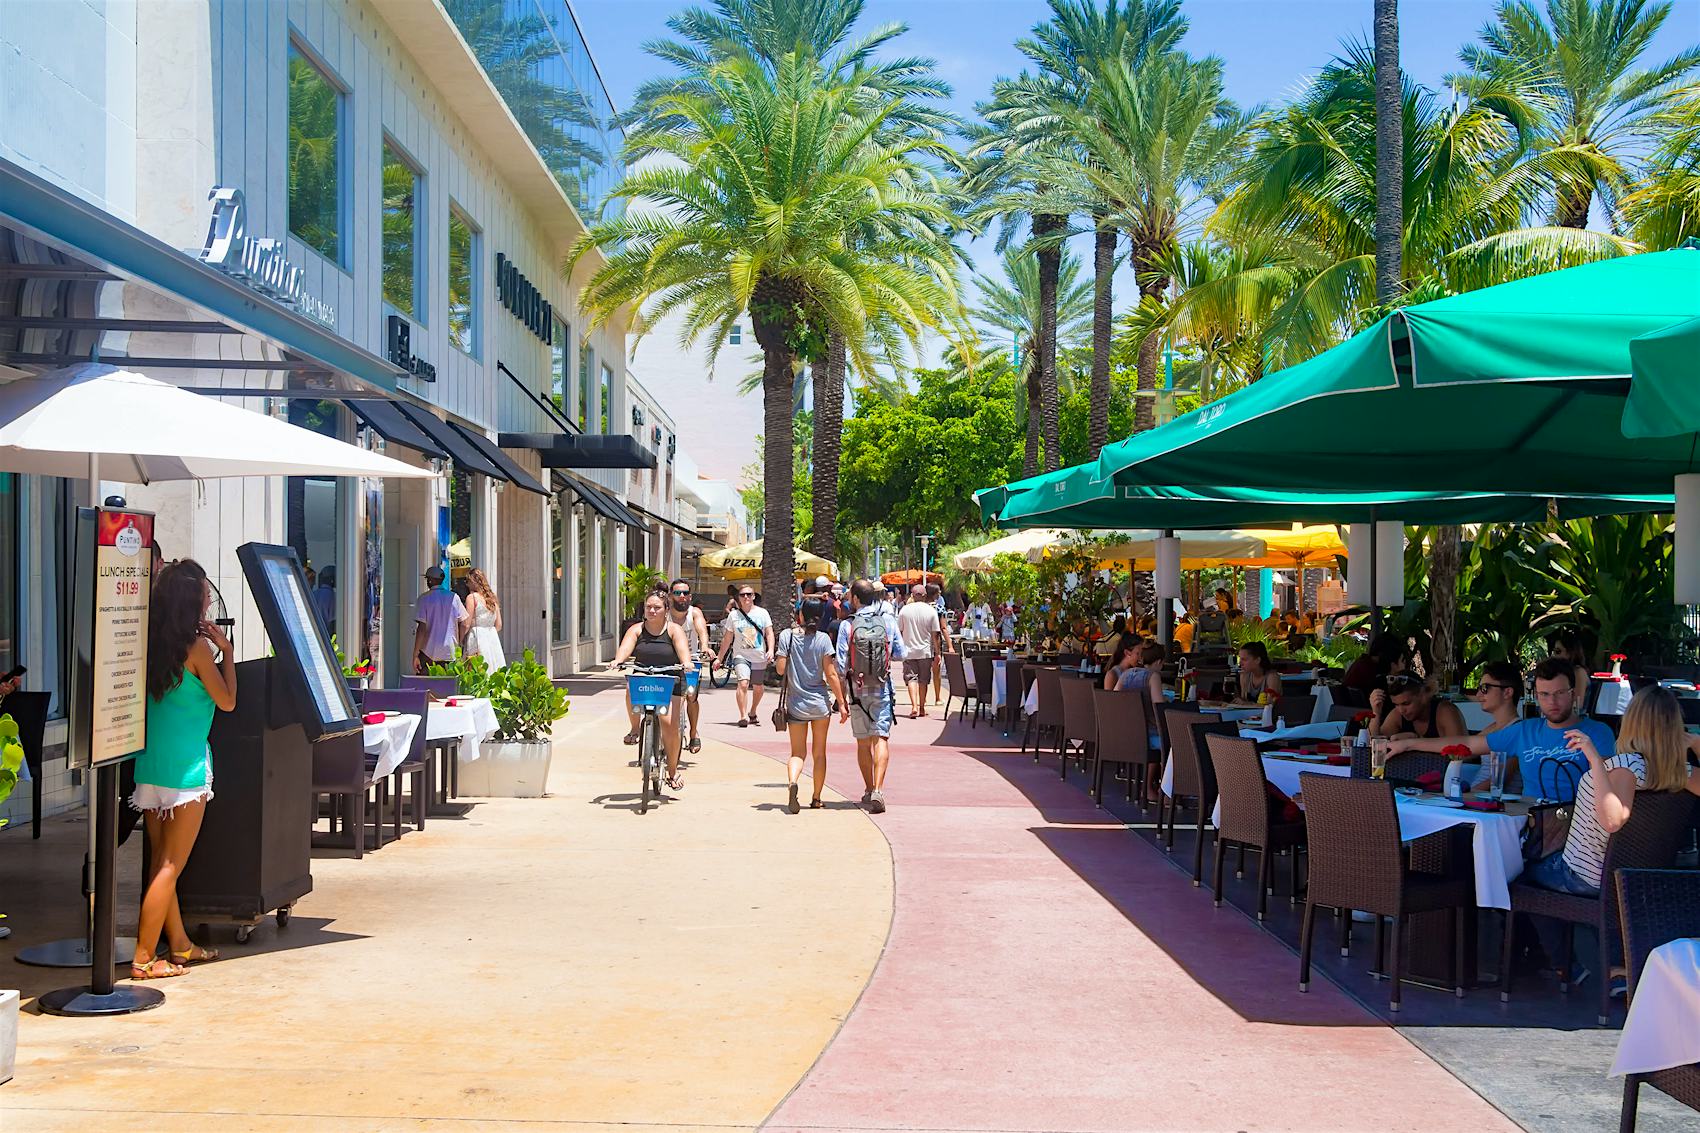 A pedestrianized street lined with restaurant tables''